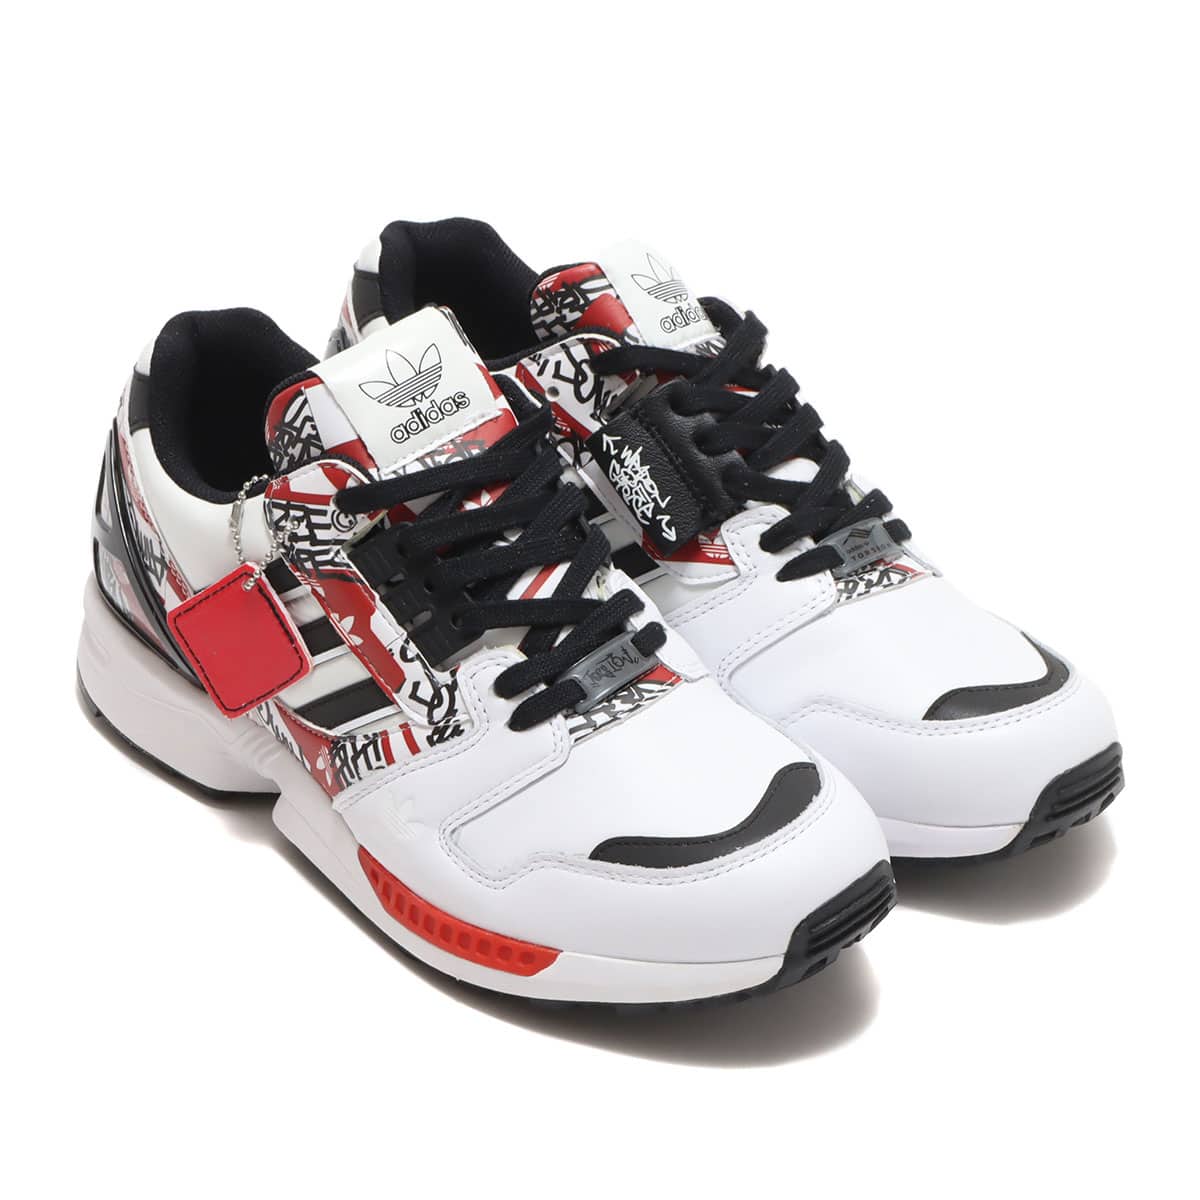 adidas ZX 8000 GRAFFITI atmos FOOTWEAR WHITE/CORE BLACK/ACTIVE RED